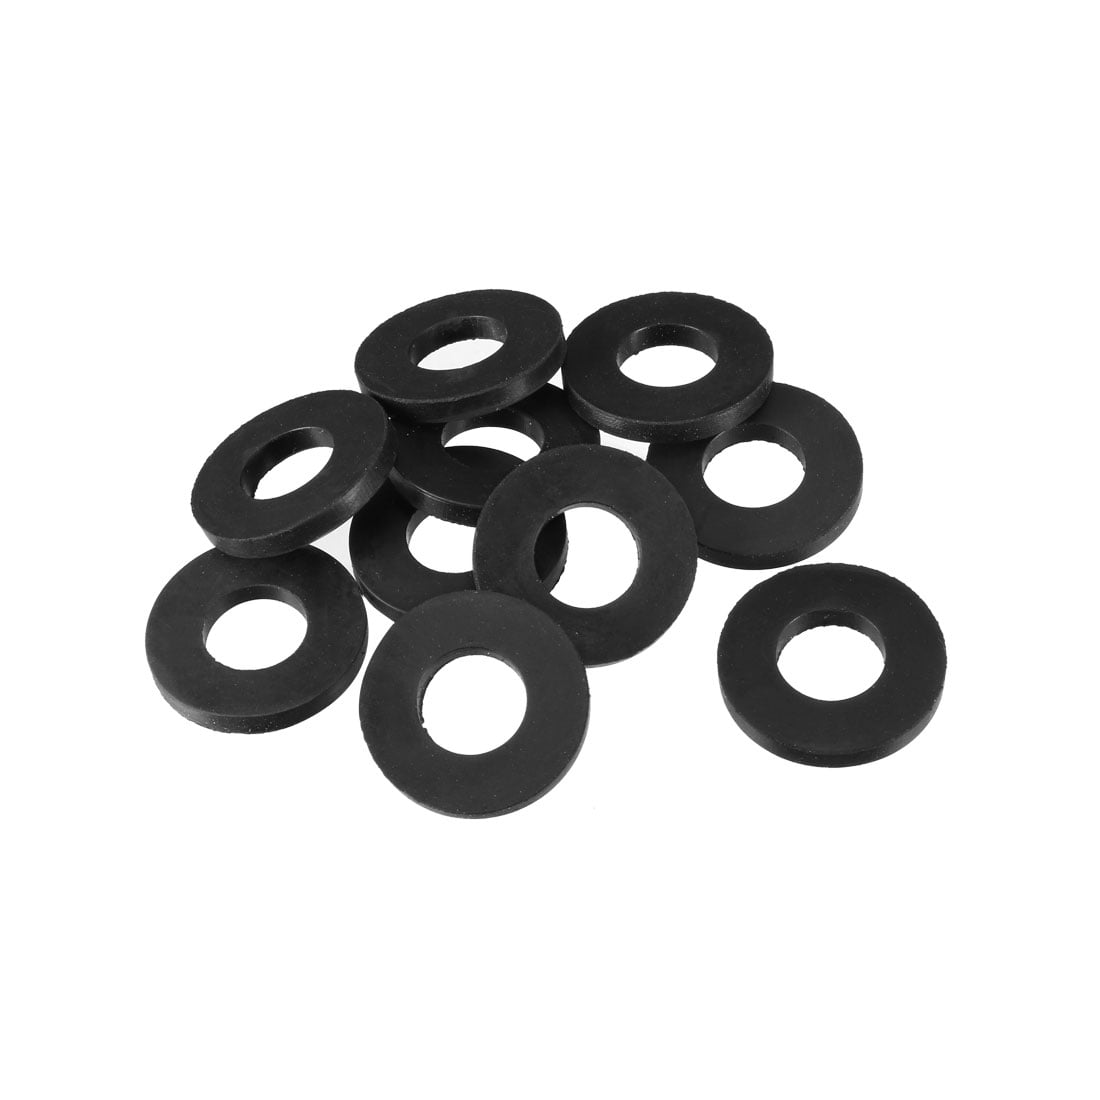 100 Flat Rubber Seals Hose Washers Pipe Water Tap O-Ring Gaskets Faucet Grommet 